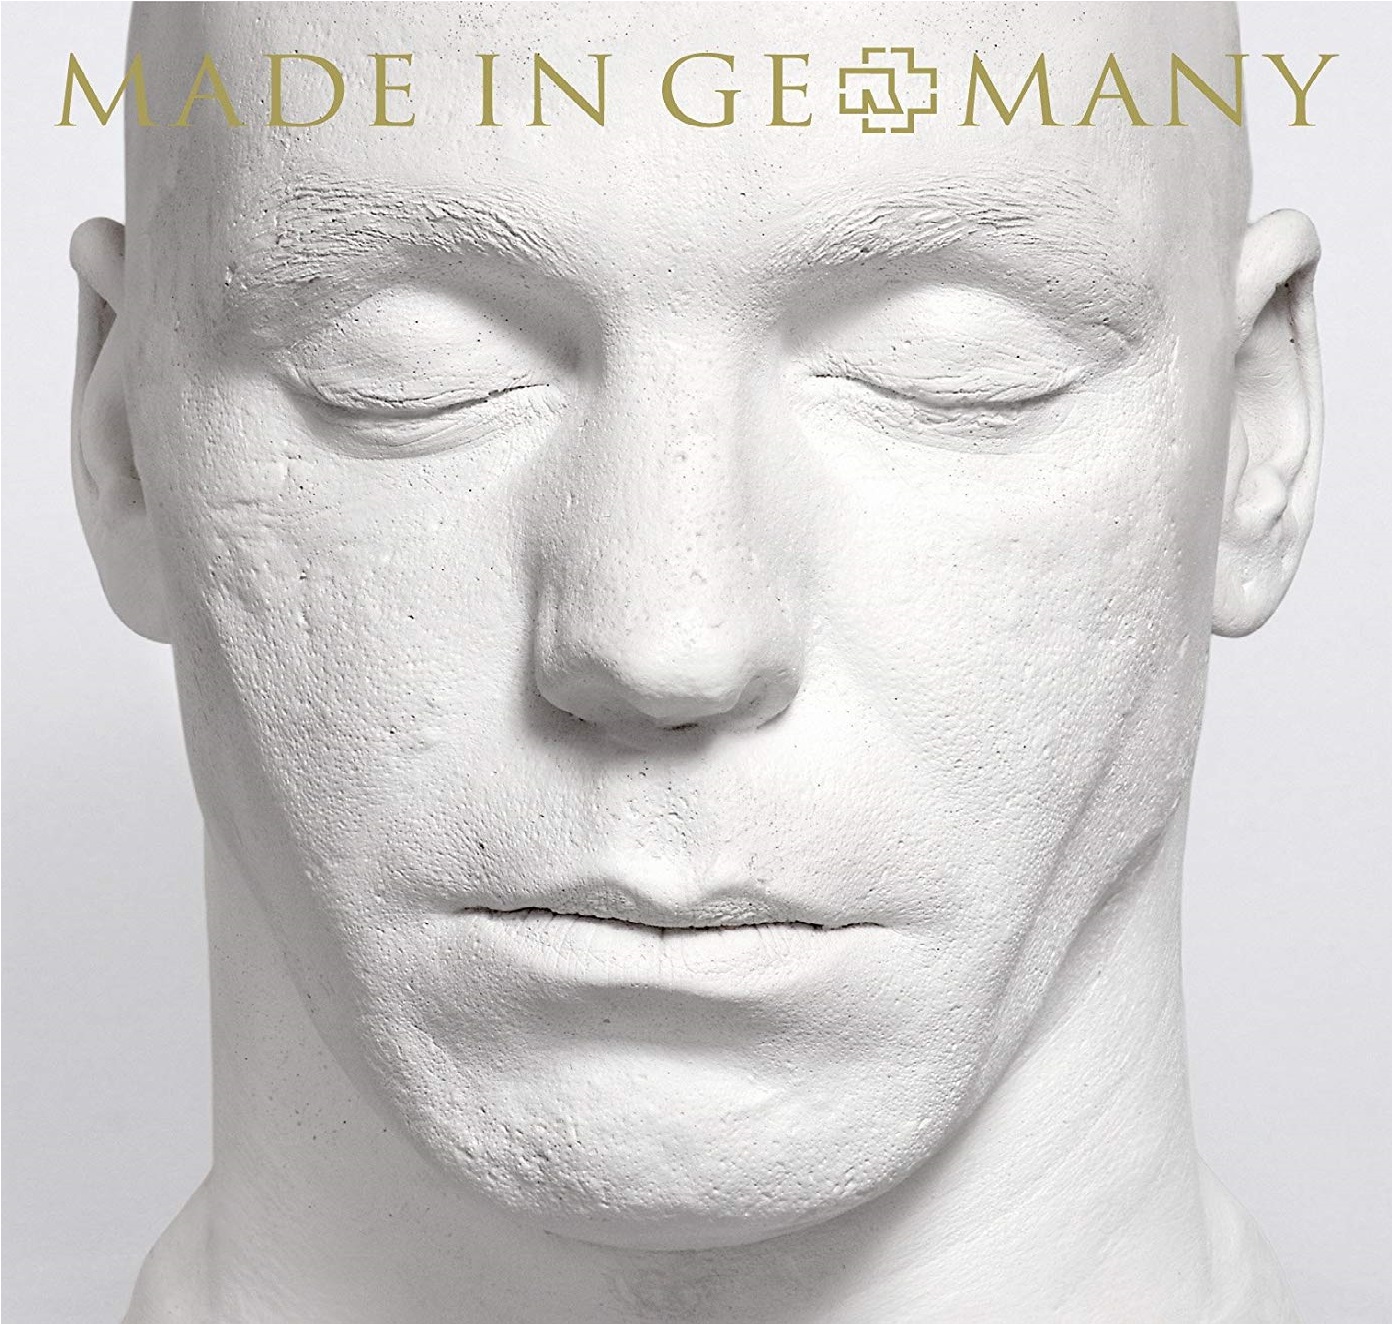 RAMMSTEIN - Made in Germany (1995 - 2011) cover 